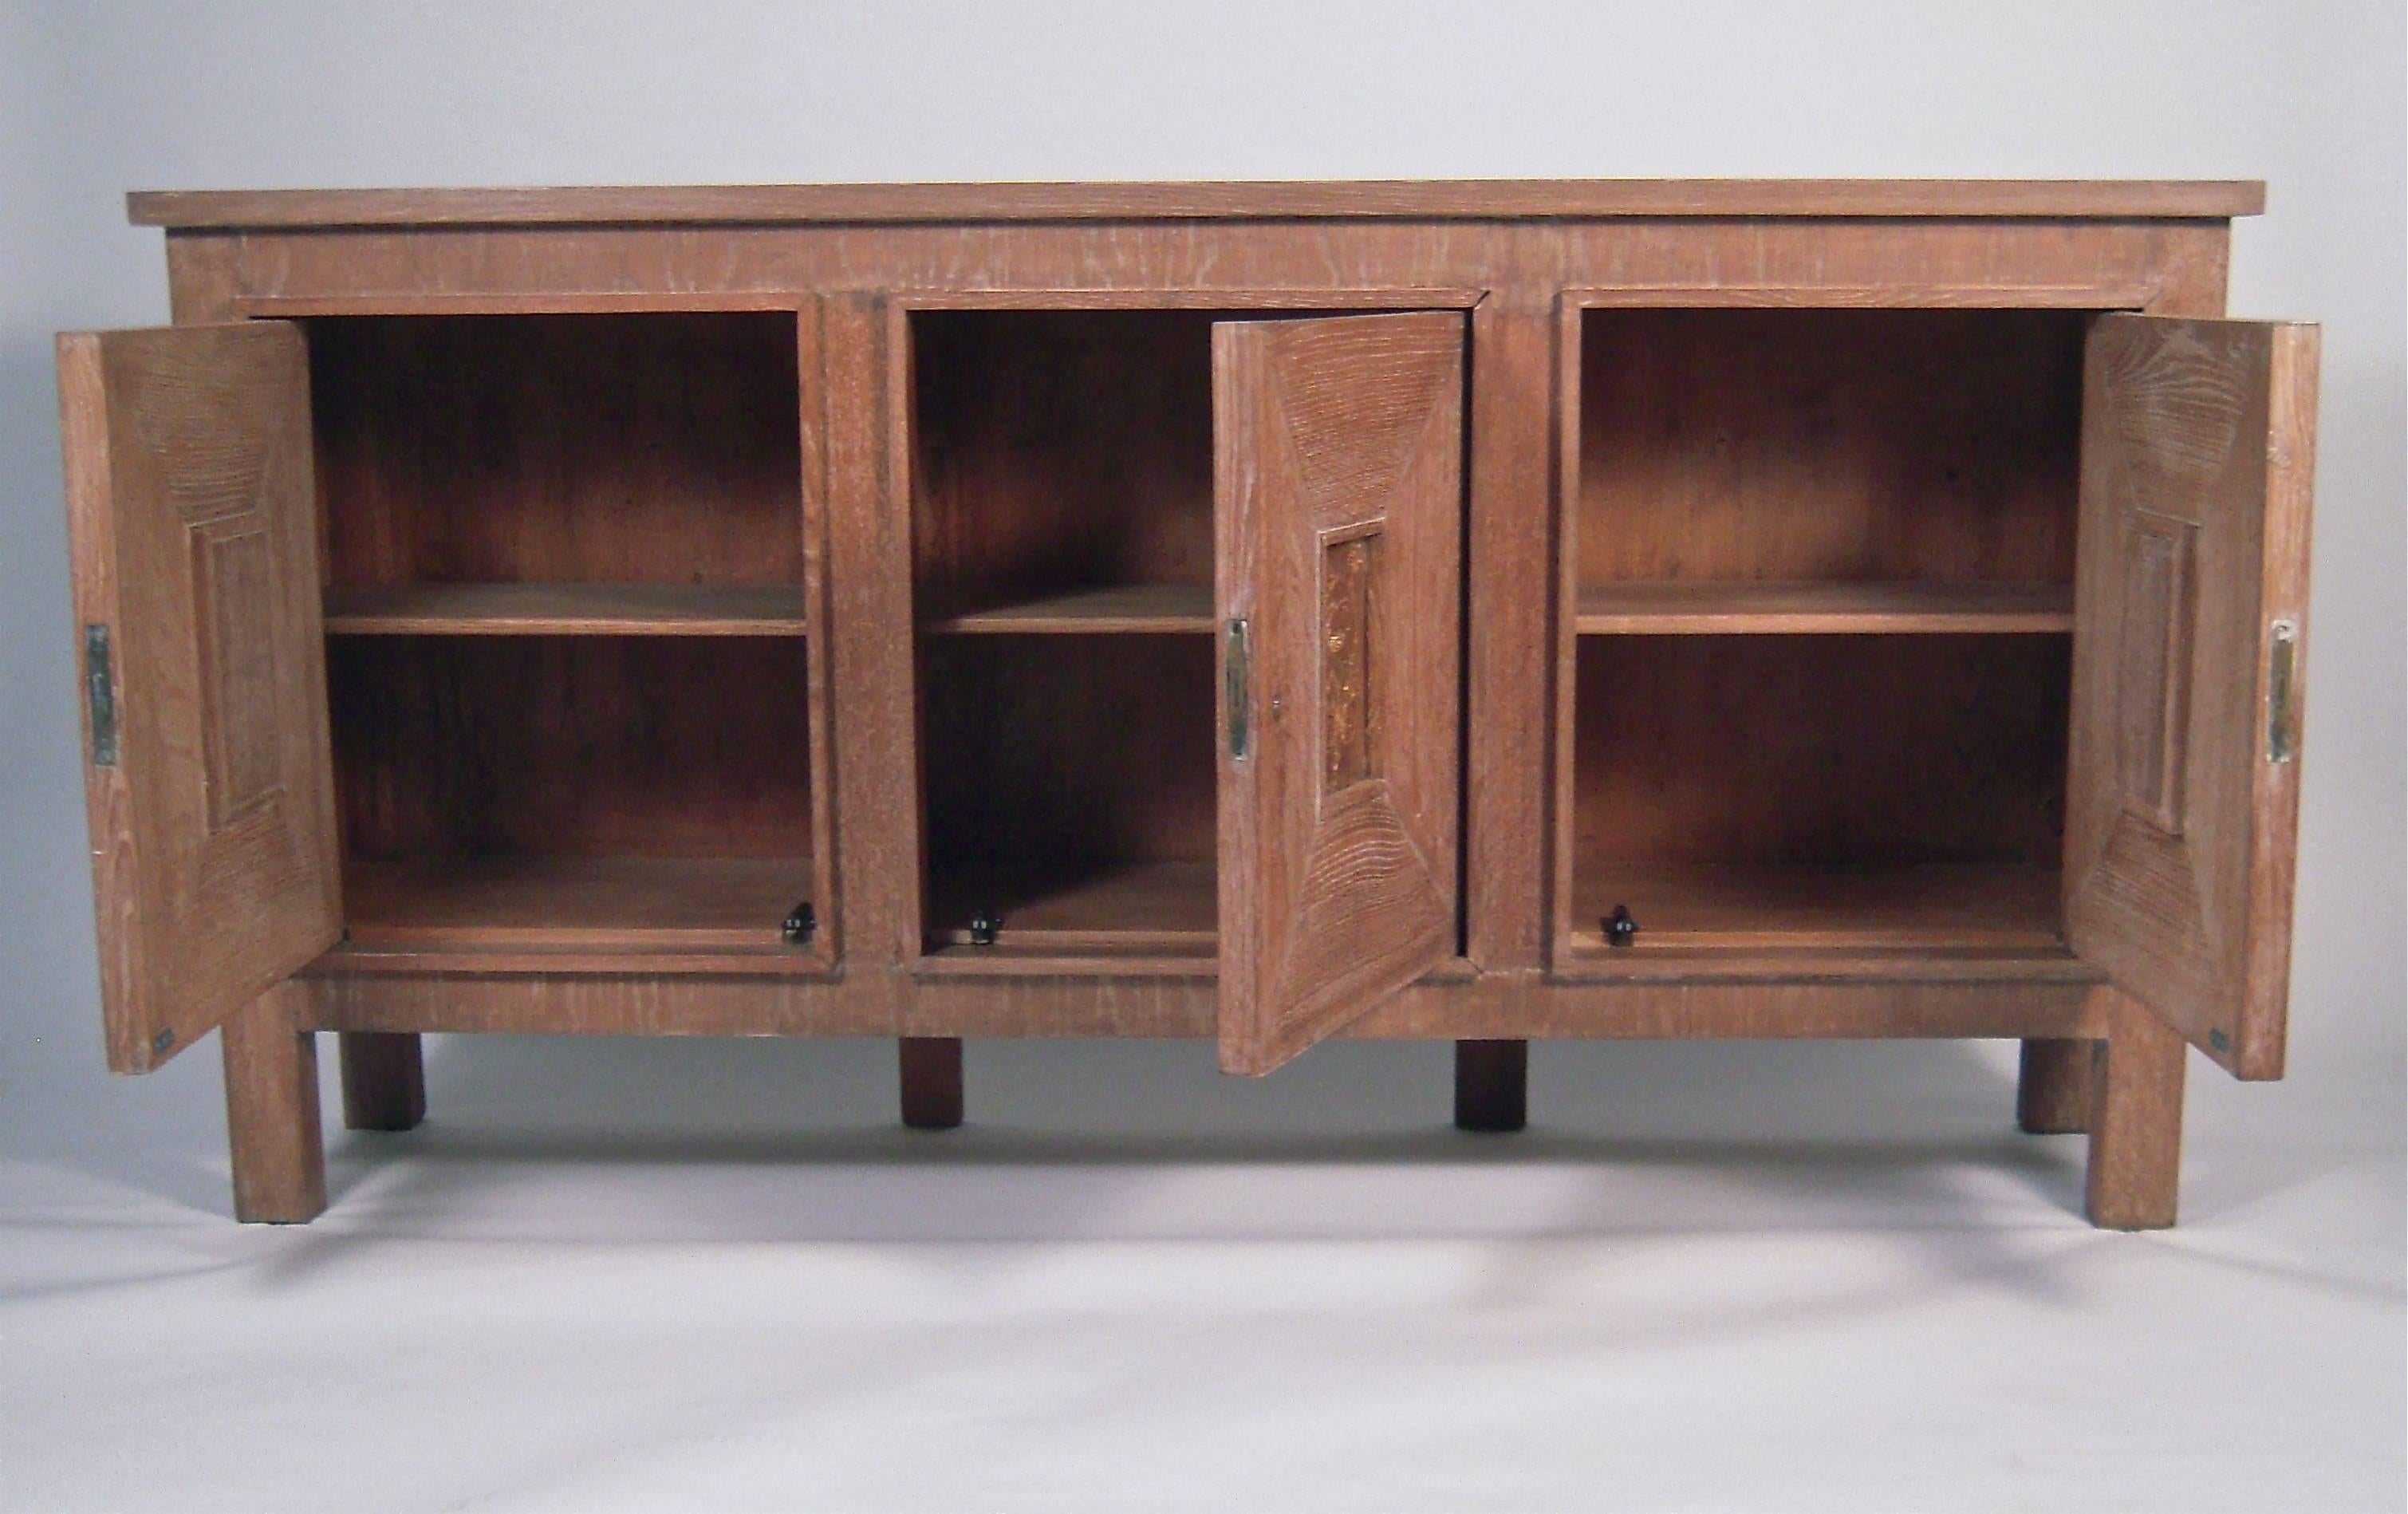 A well proportioned cerused, oak credenza, French or American, circa 1940s, of rectangular form, the paneled cupboard doors each centered by an incised, gilded decorative floral and figurative panel, raised on square section legs. Doors are fitted